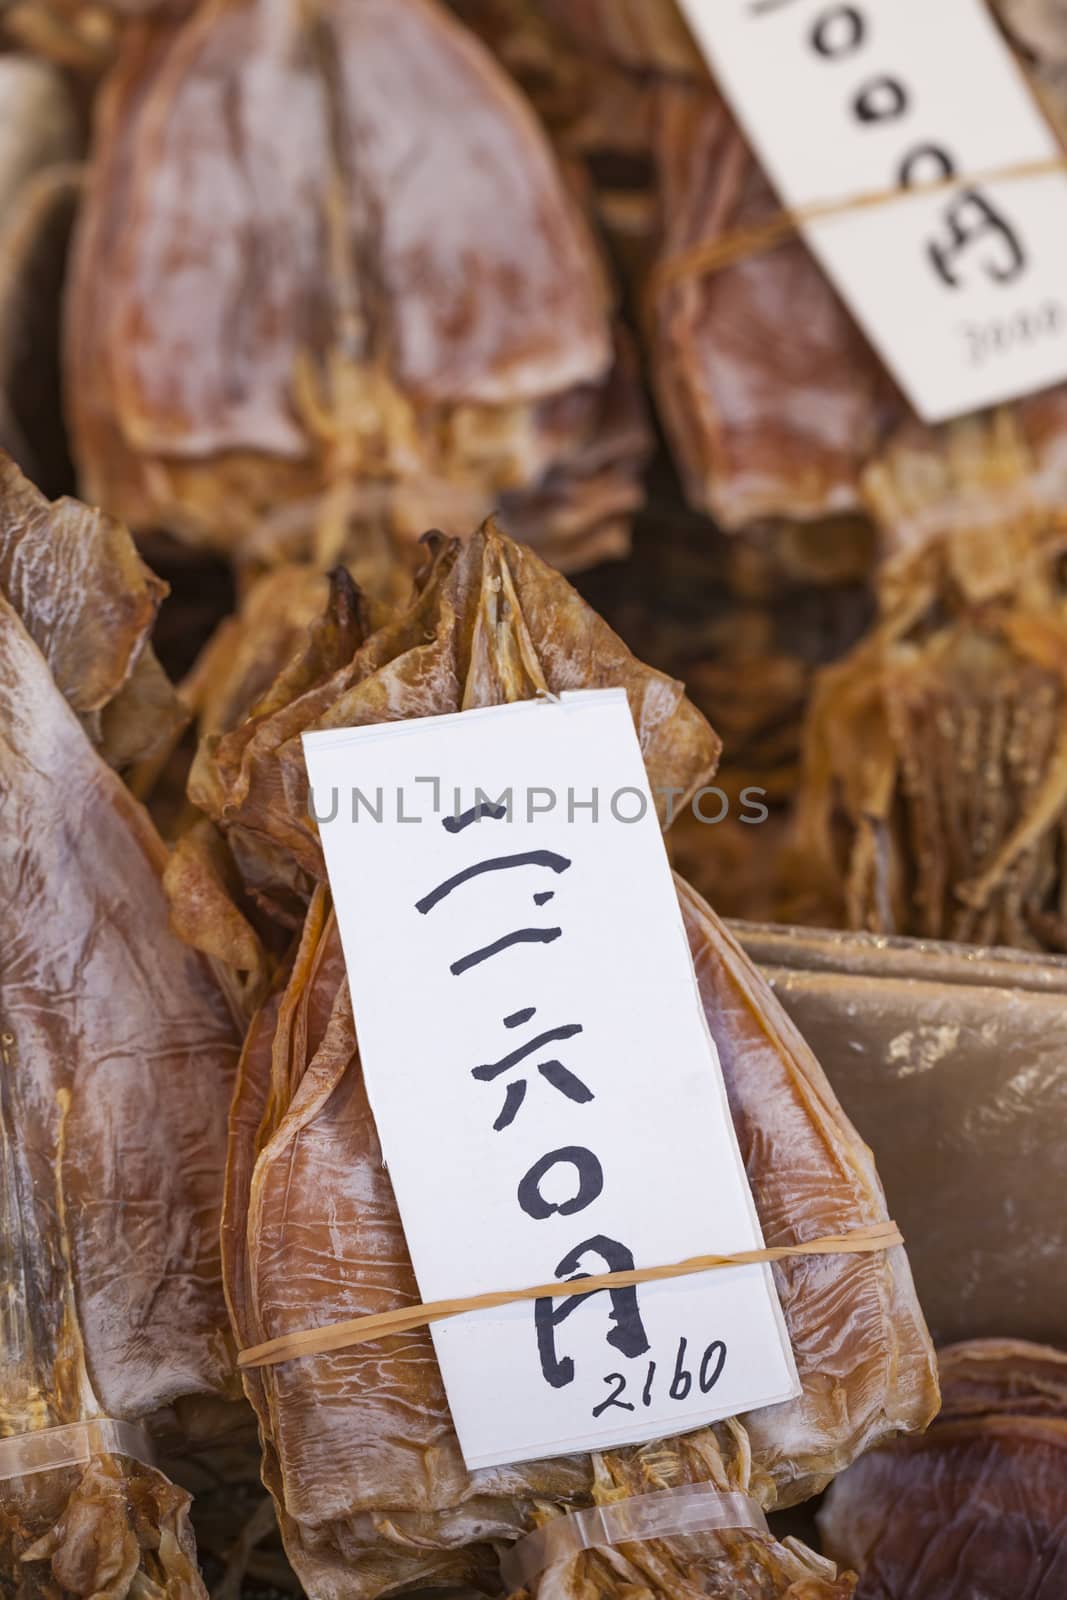 Dried fish, seafood product at market from Japan. by mariusz_prusaczyk